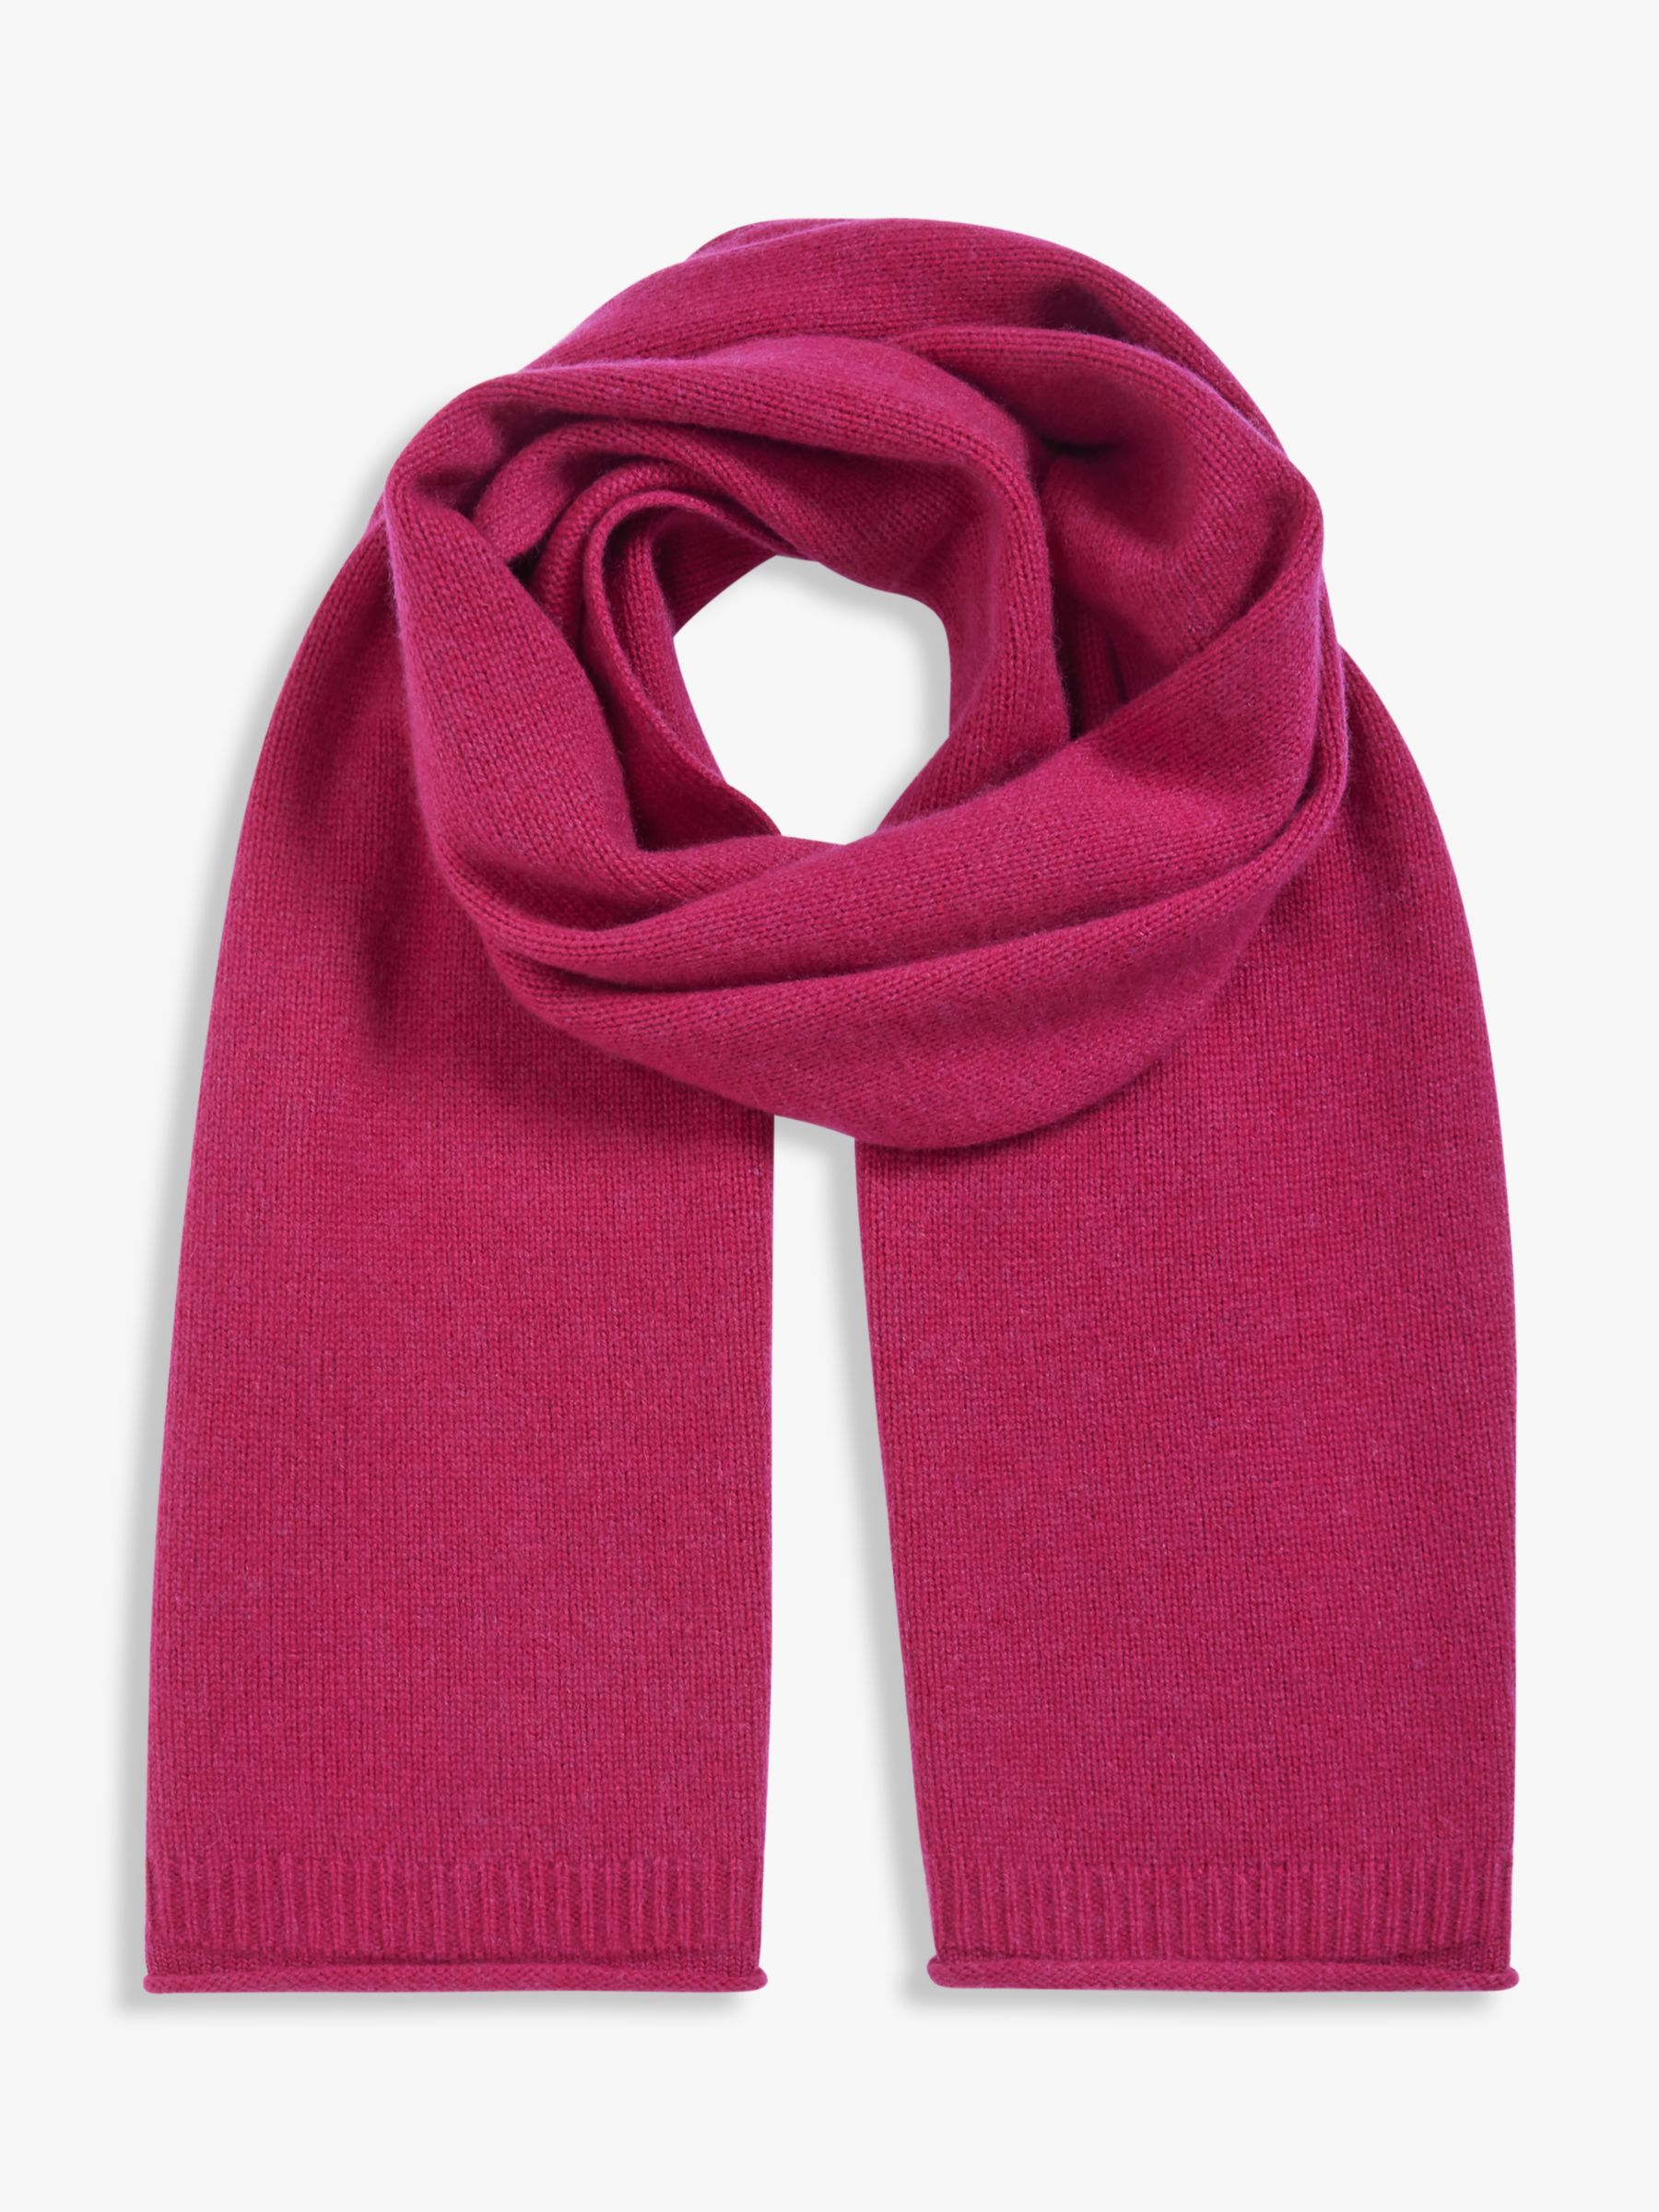 John Lewis & Partners Cashmere Knitted Scarf, Red Berry at John Lewis ...